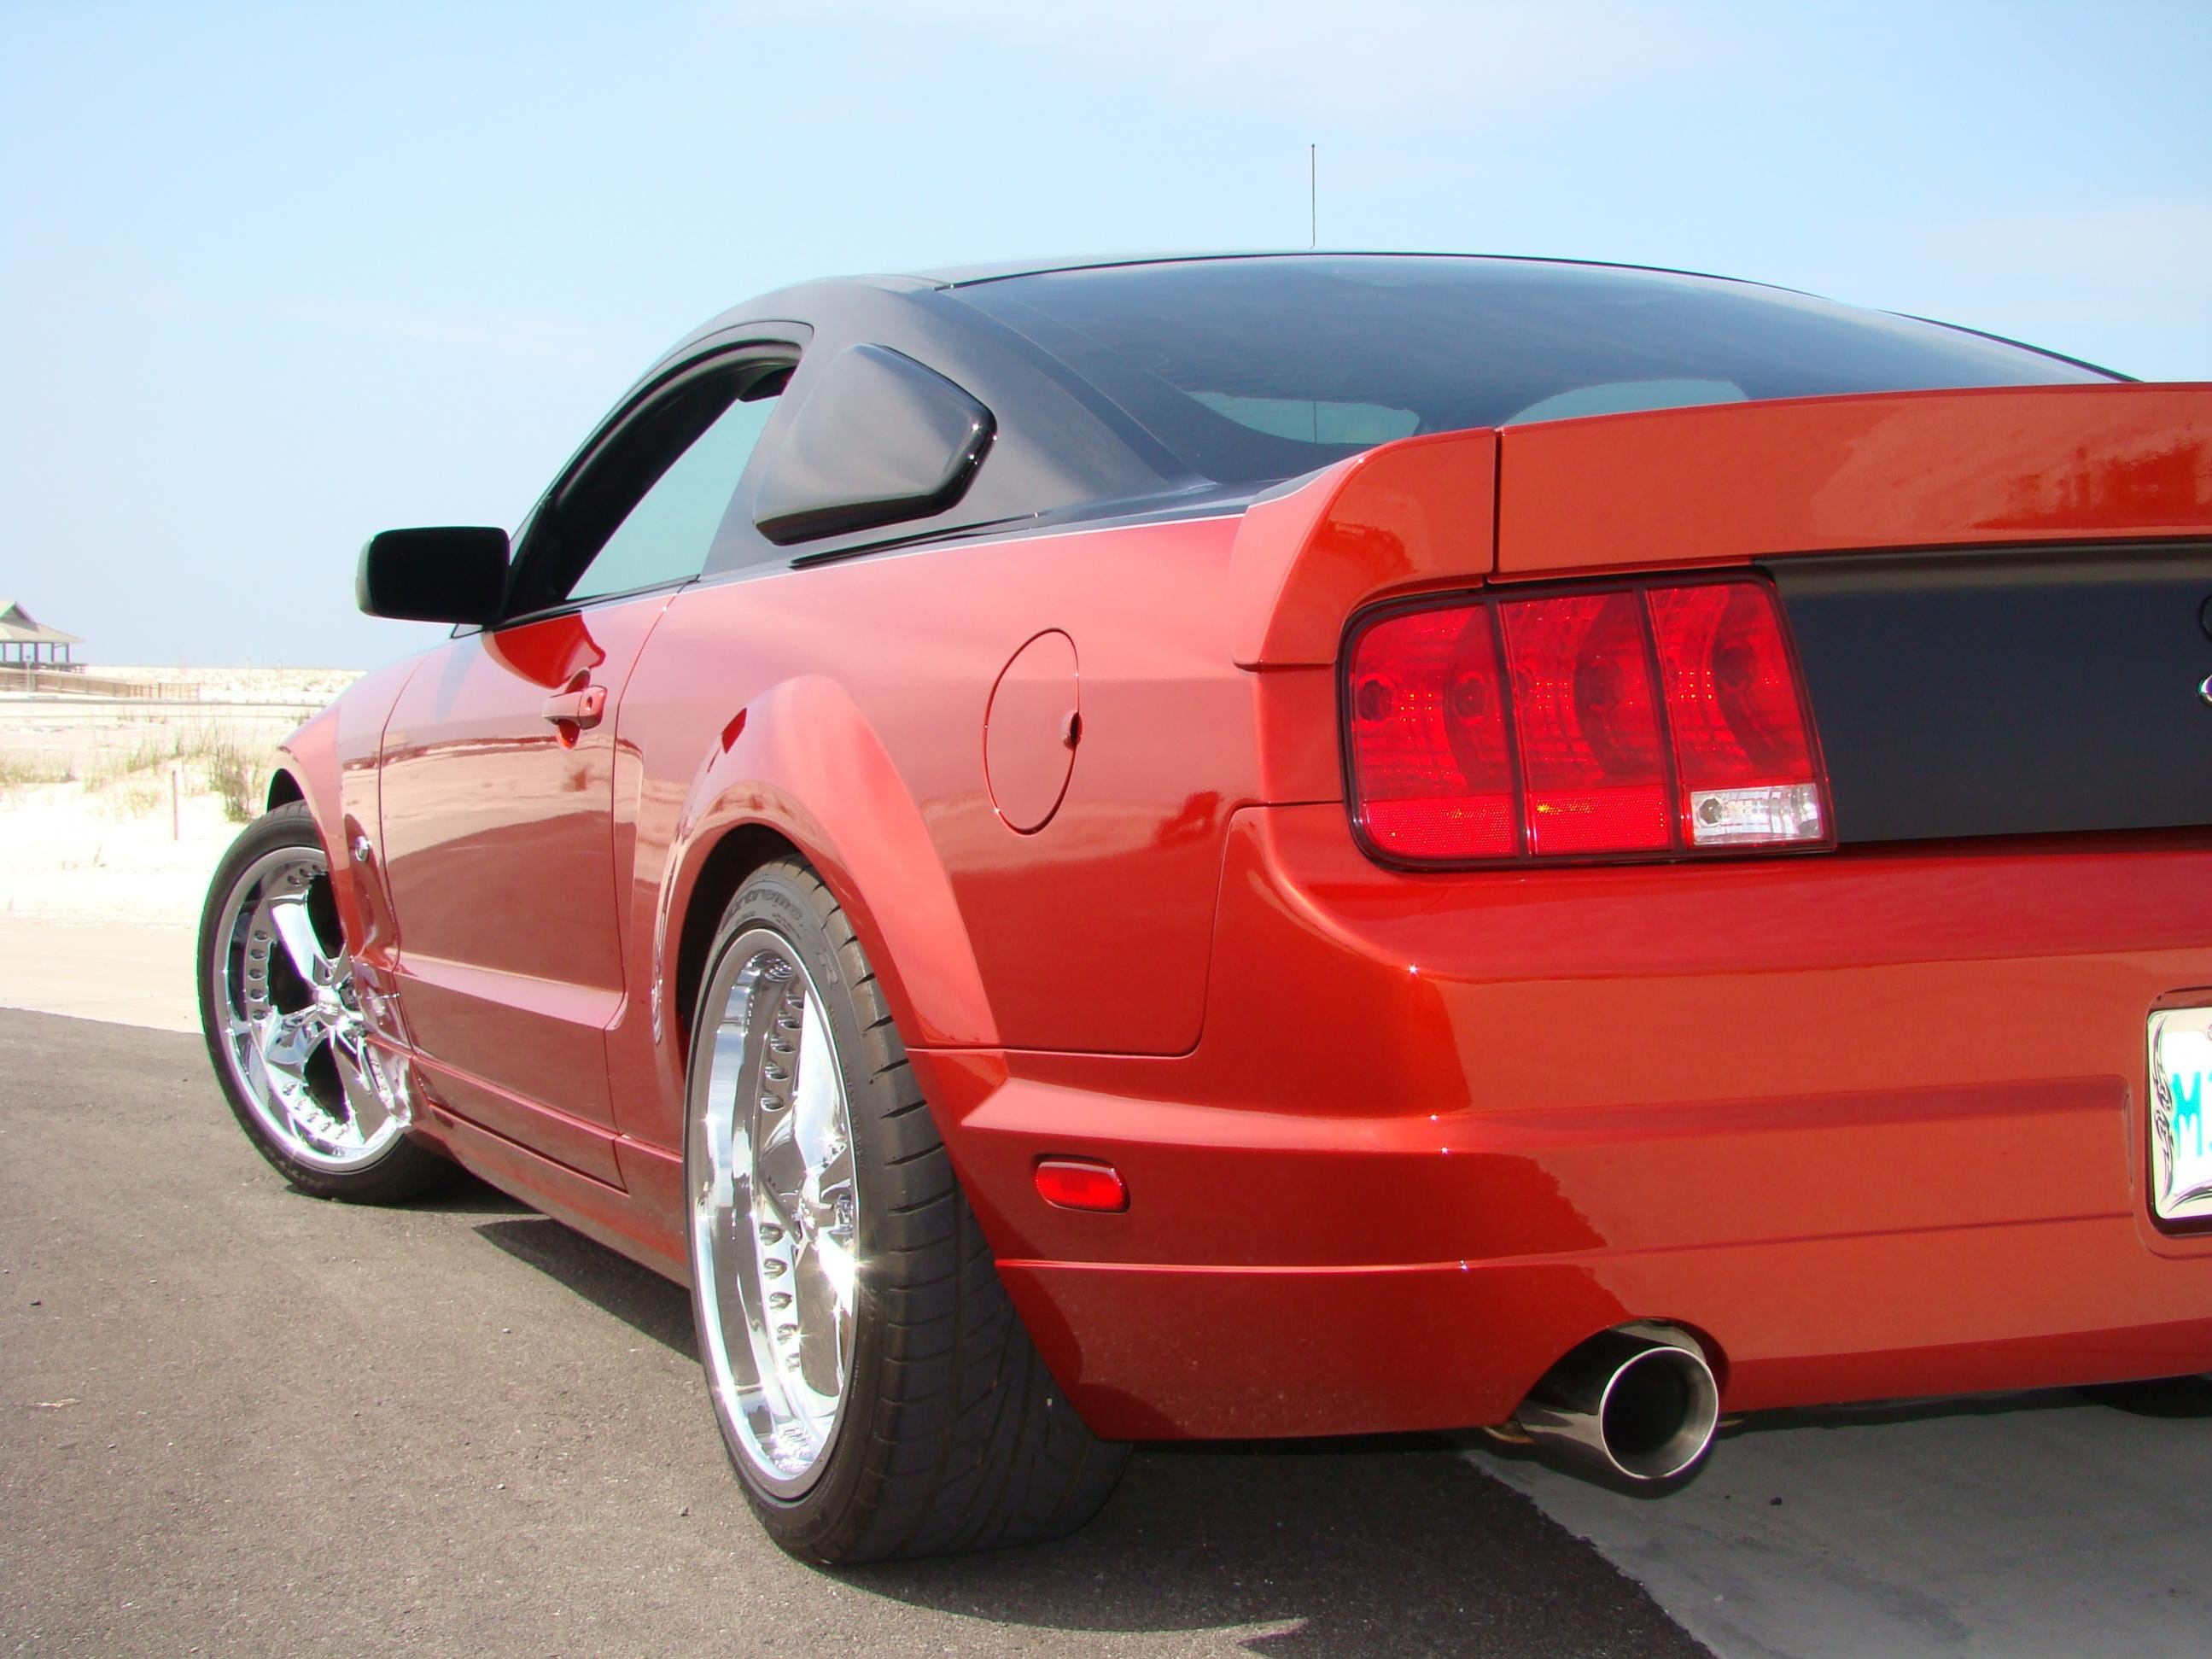 2006, Foose, Design, Mustang, Stallion, Ford, Tuning, Muscle, Hot, Rod, Rods Wallpaper